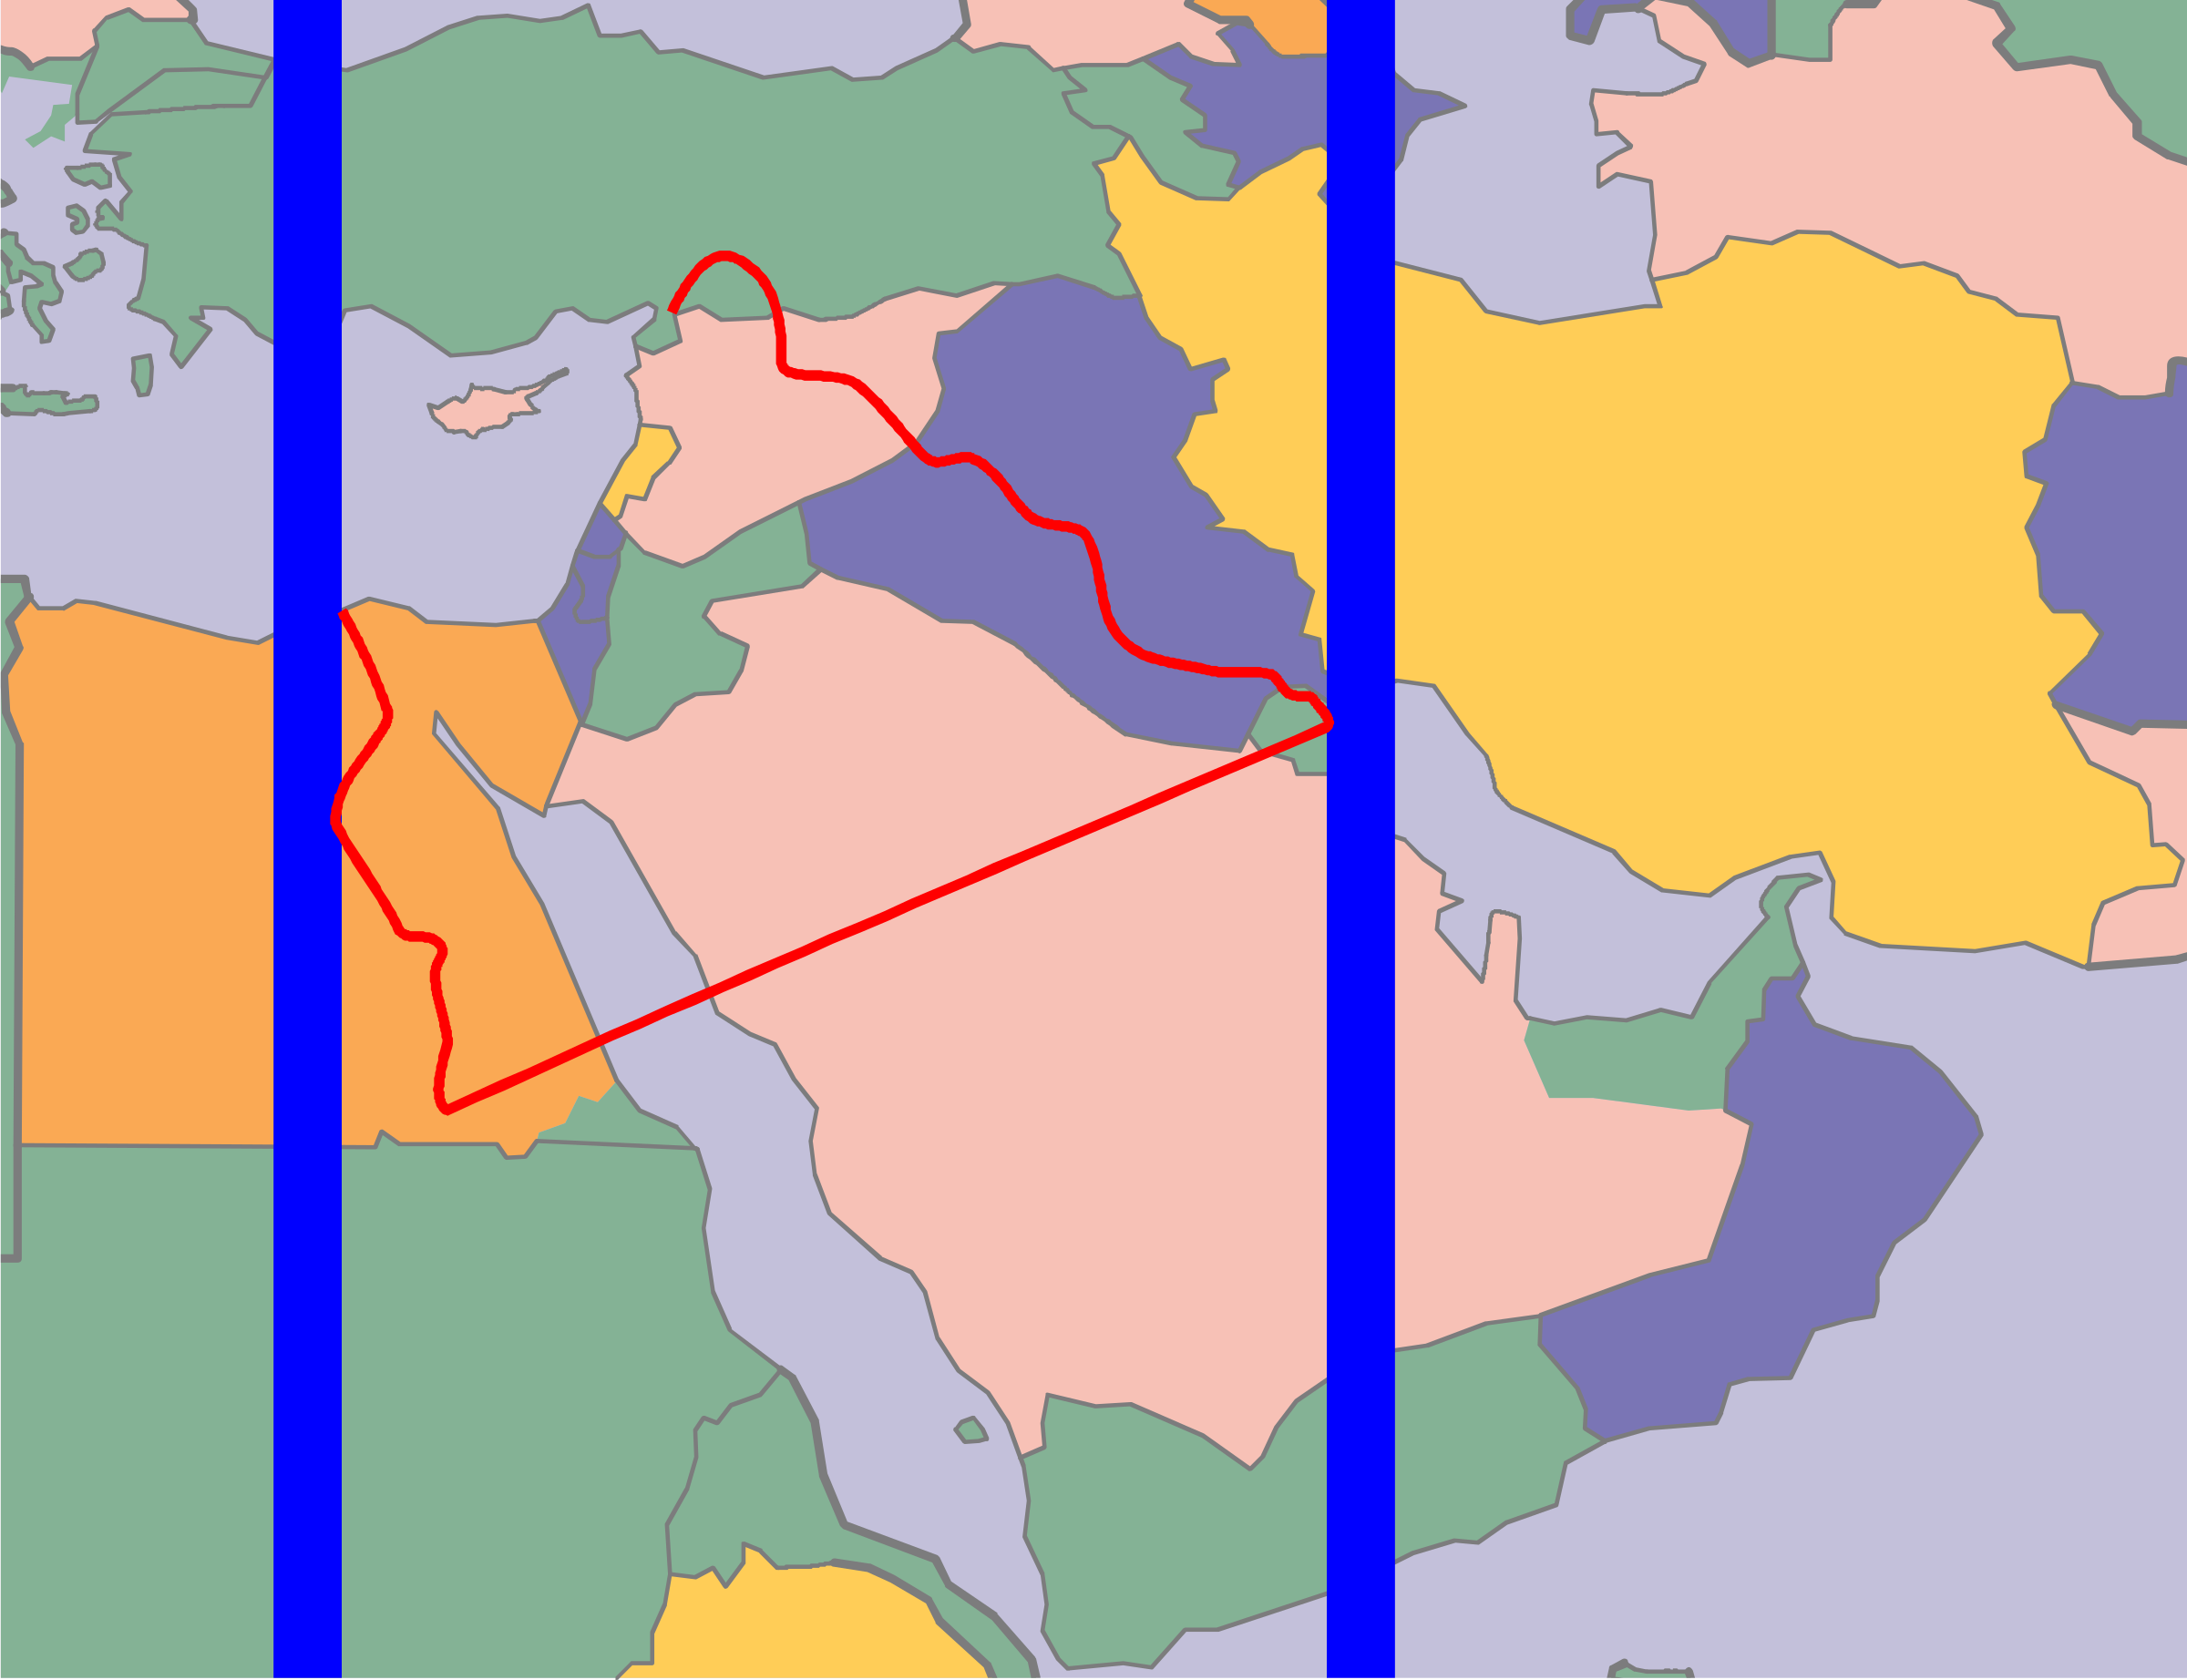 eretz-israel-greater-israel-borders-map-Bible-Quote-inkscape.png